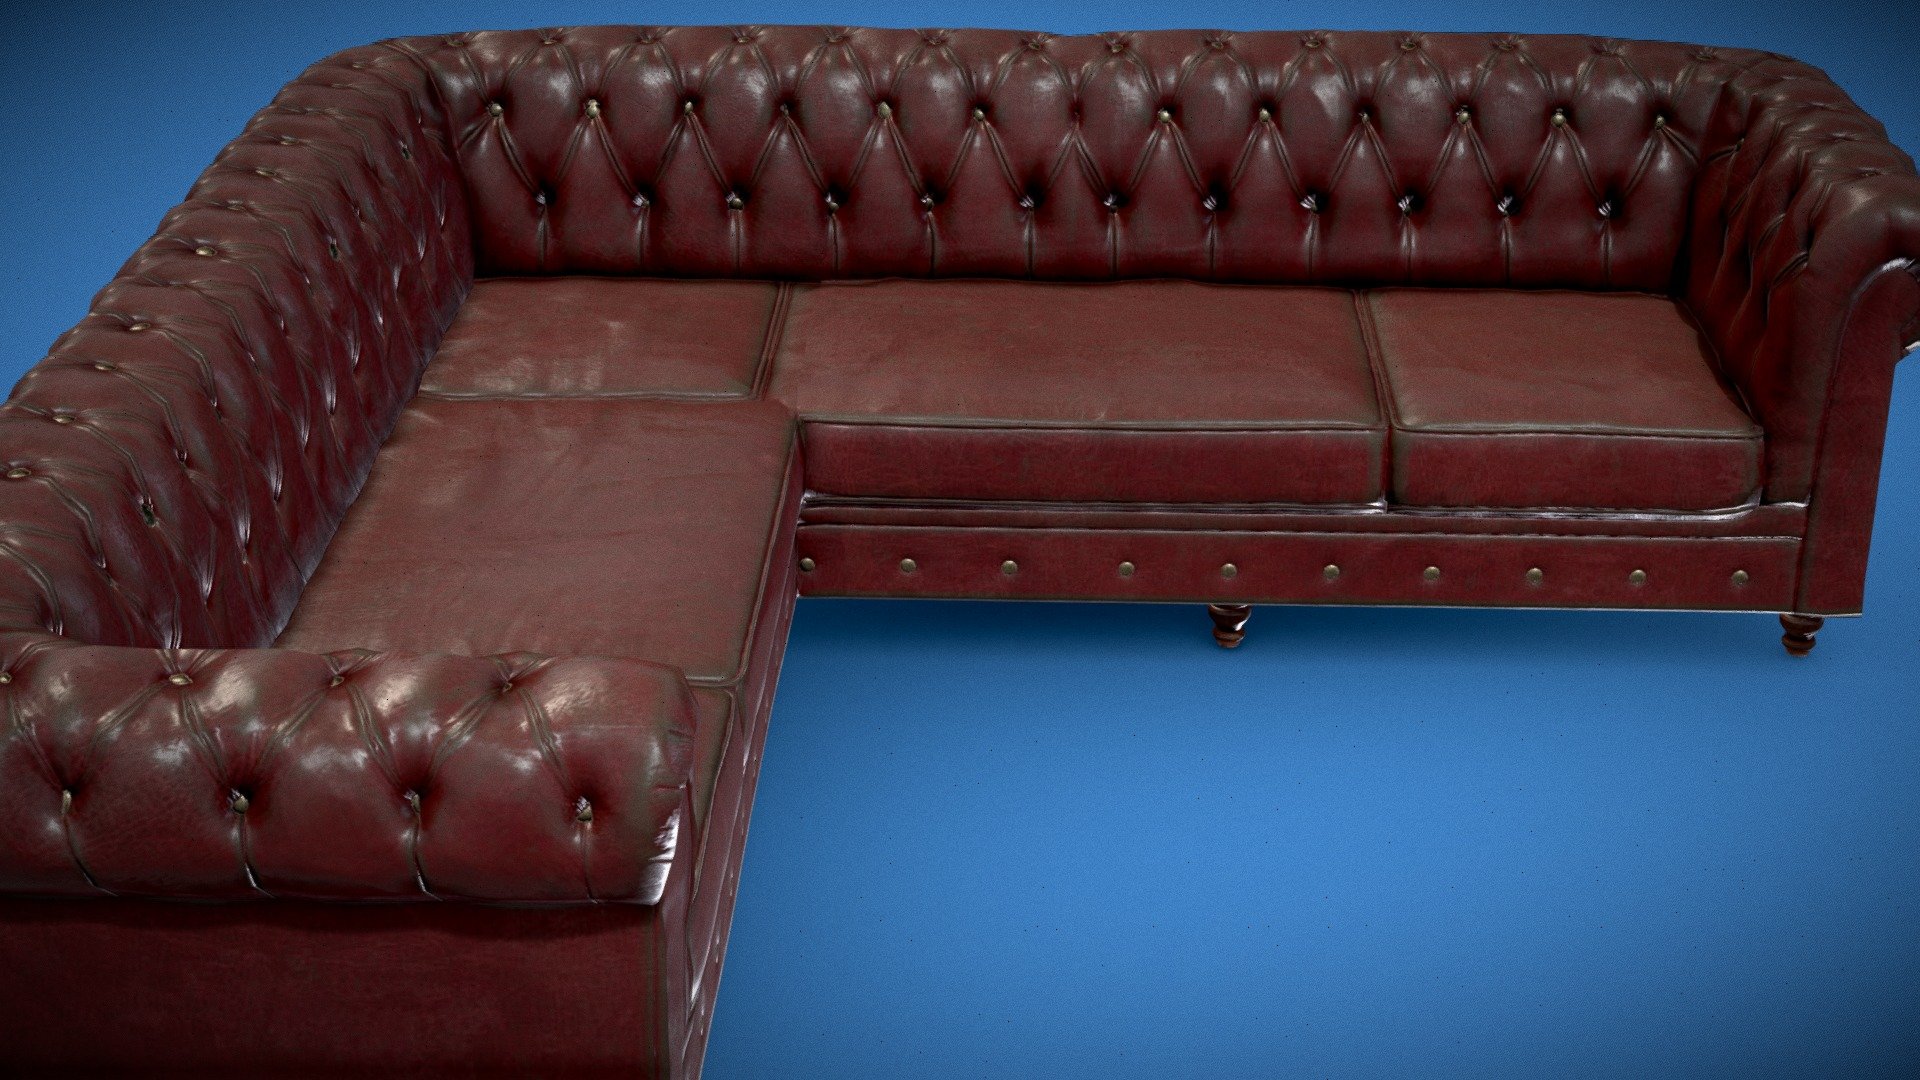 https://www.youtube.com/watch?v=DToE_yoVsNk

https://www.youtube.com/watch?v=yDY90bKLF7c

https://www.artstation.com/artwork/r9xKdO

Leather Sofa for your game, includes high quality textures and suitable for first-person games. Texture size 2048x2048.

PBR Game Ready

AAA models and textures

Textures PBR shader for games, -They maybe used with Unity3D, Unreal Engine etc.

Real-world scale and centered.

UnwrapUVW included.

Albedo, Roughness, Metallic, Normal map, AO

Texture format: TGA

Model formats: 3dsMax 2020. fbx. obj.

Polycount:

Leather Sofa - 12514 tris 3d model